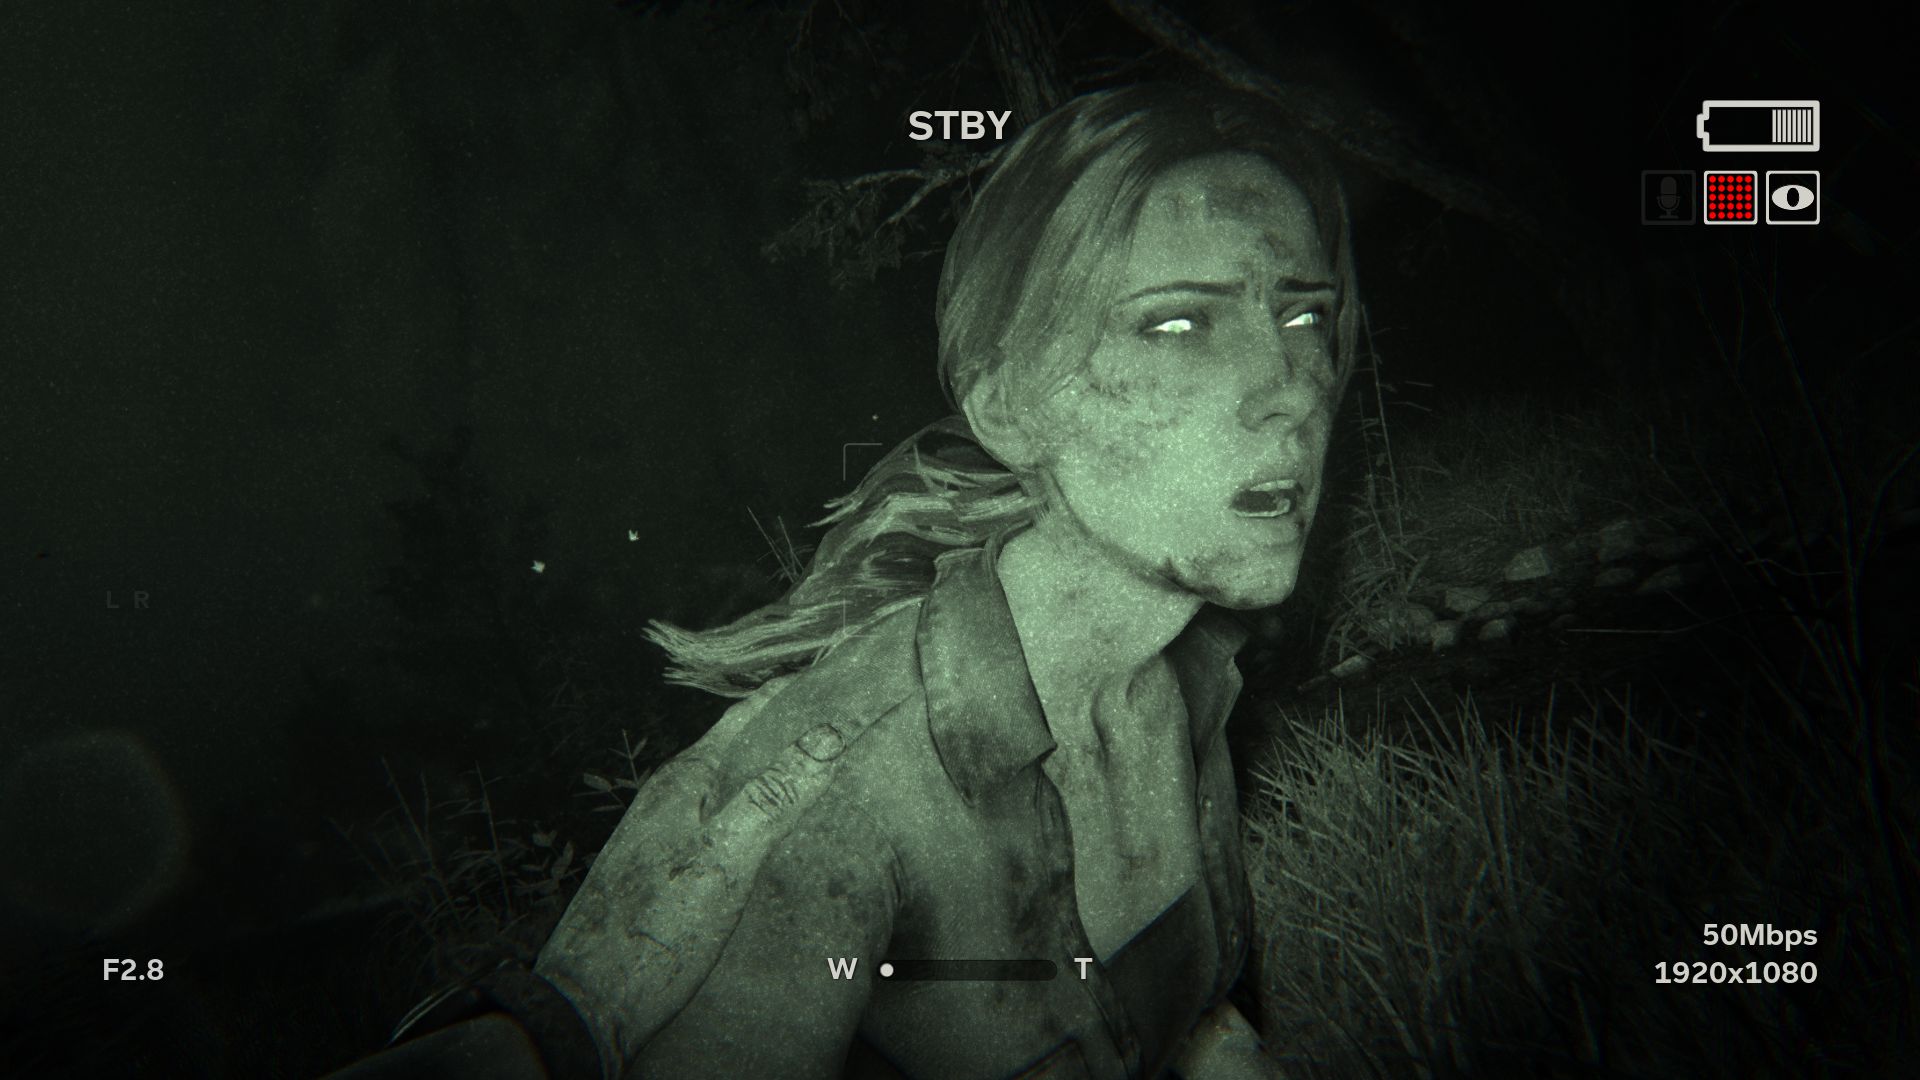 outlast 2 game